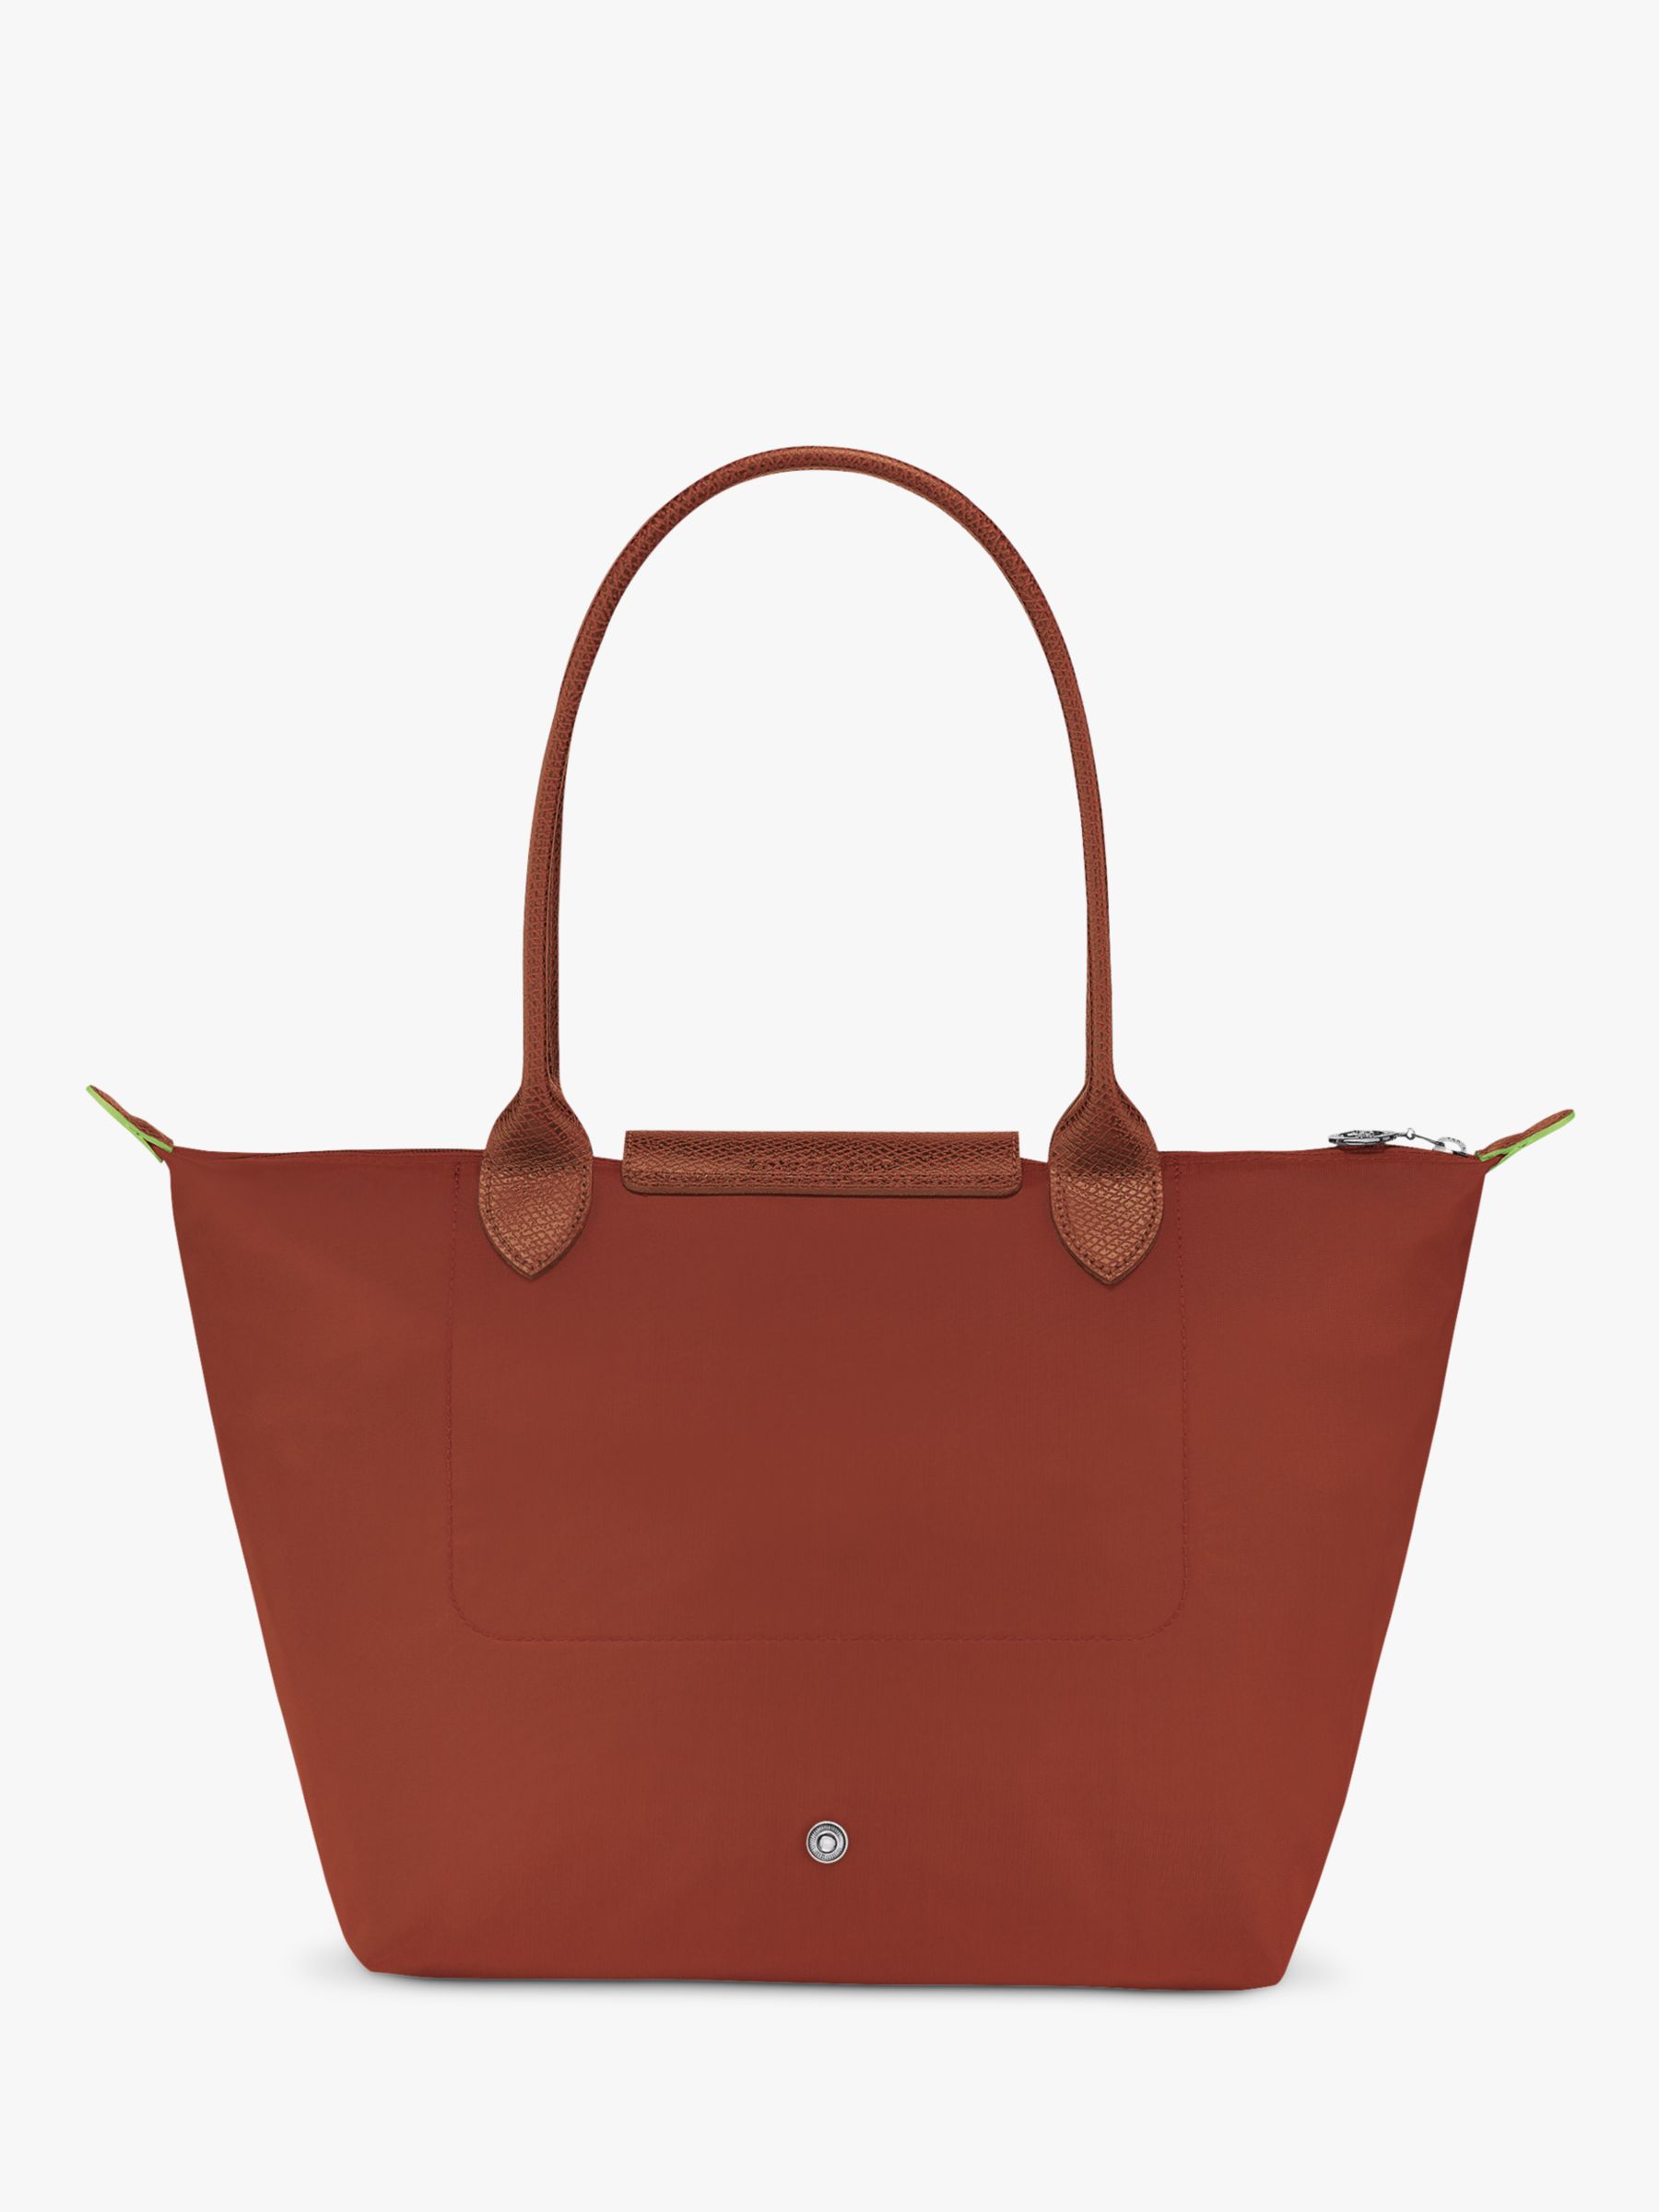 Longchamp Le Pliage Green Recycled Tote Bag, Chestnut